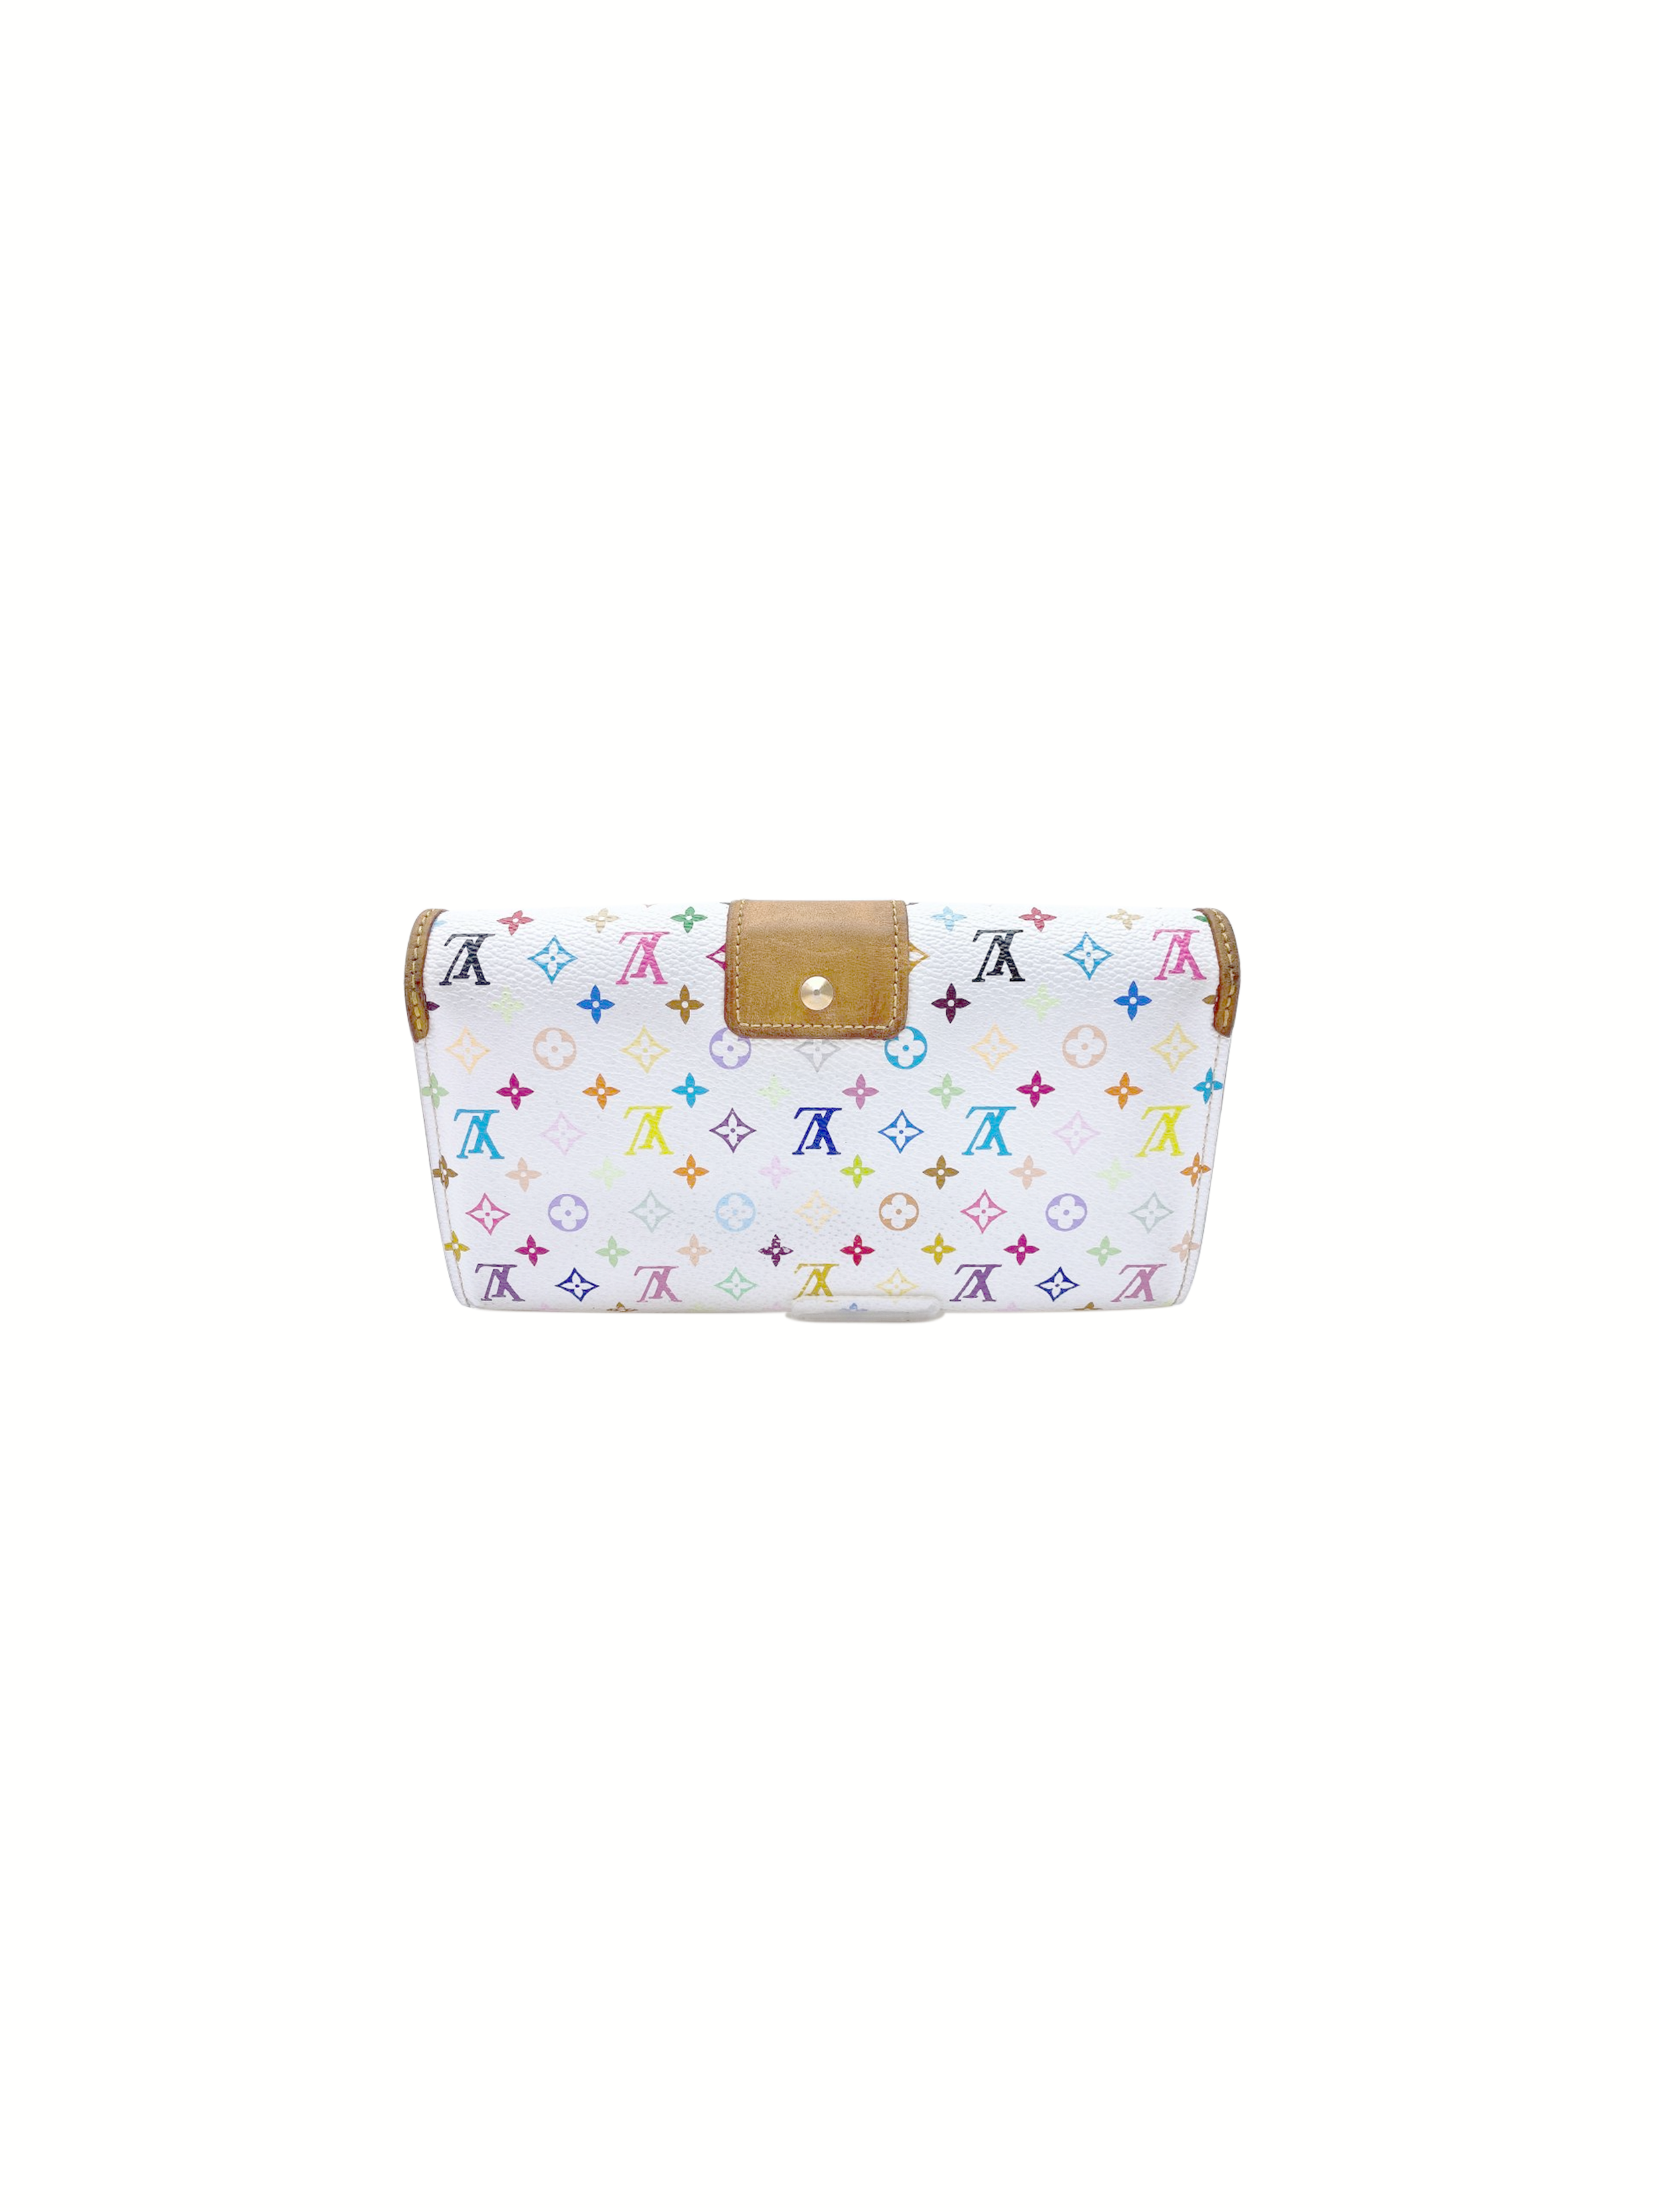 Louis Vuitton x Takashi Murakami Limited Edition wallet - S/S 2003 second  hand vintage